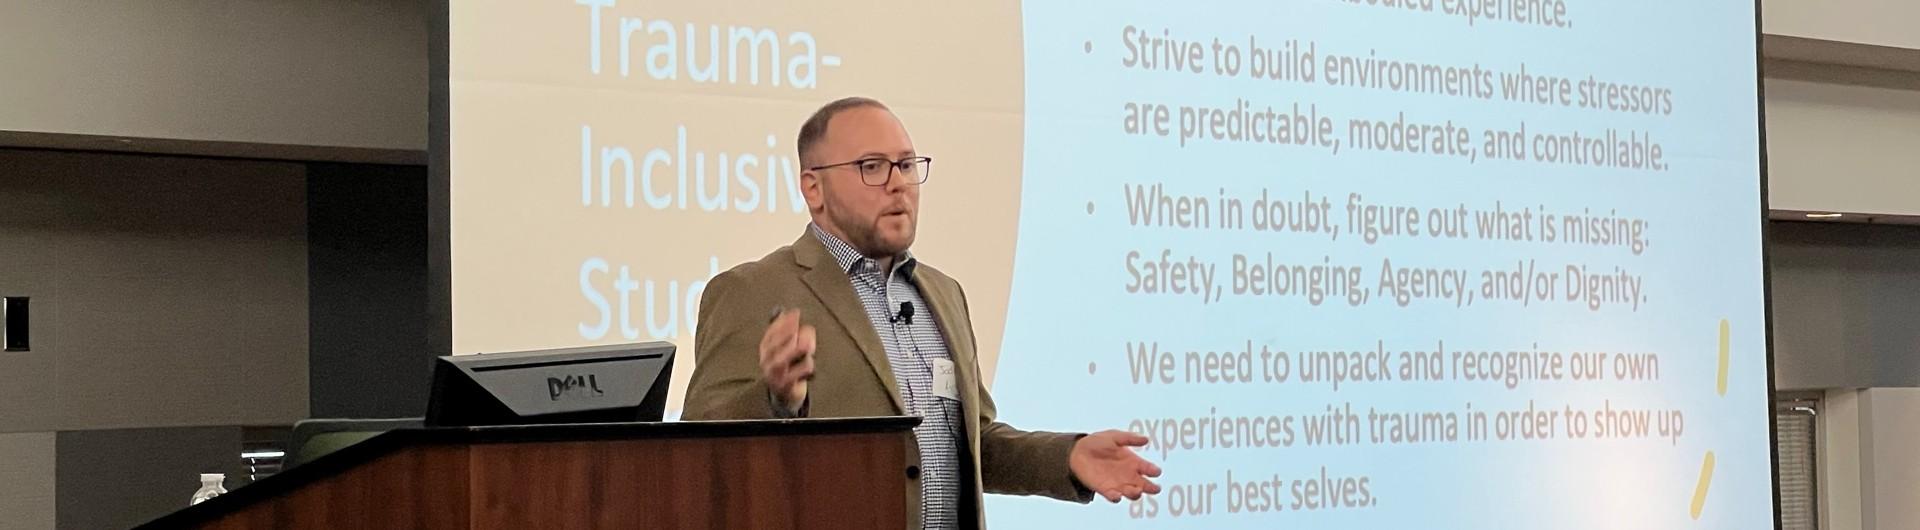 Assistant Professor of Higher Education Jason Lynch of Appalachian State University in North Carolina presents “Working Toward Trauma-Inclusive Campus Environments” at Cal State Long Beach Oct. 14. Dr. Lynch is regarded as an innovative thought leader in college student affairs.